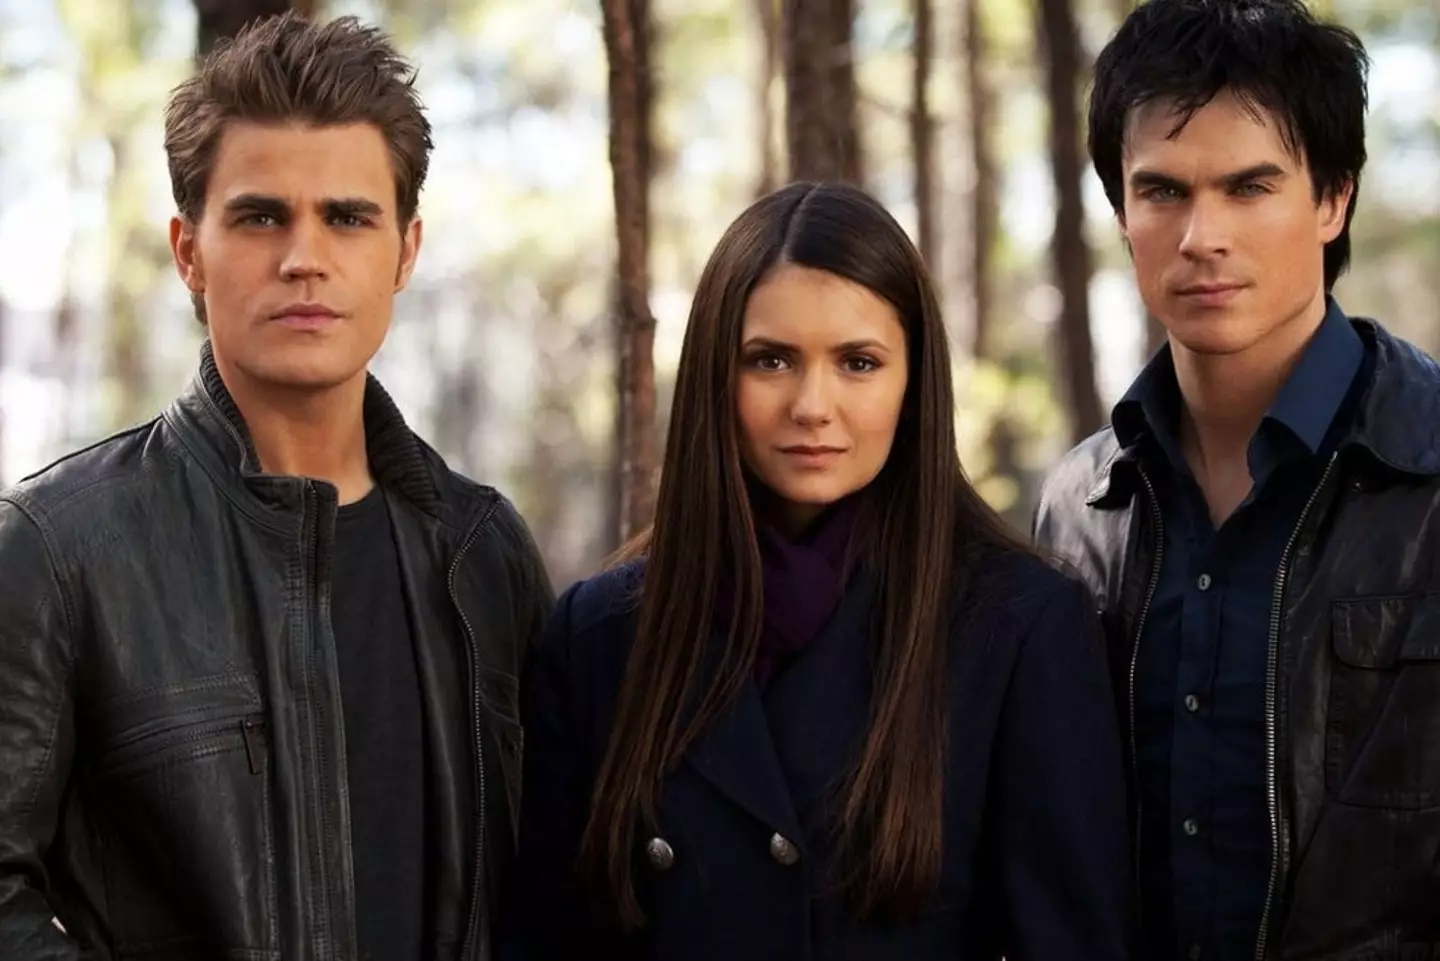 The incident happened just as Vampire Diaries was about to premiere.